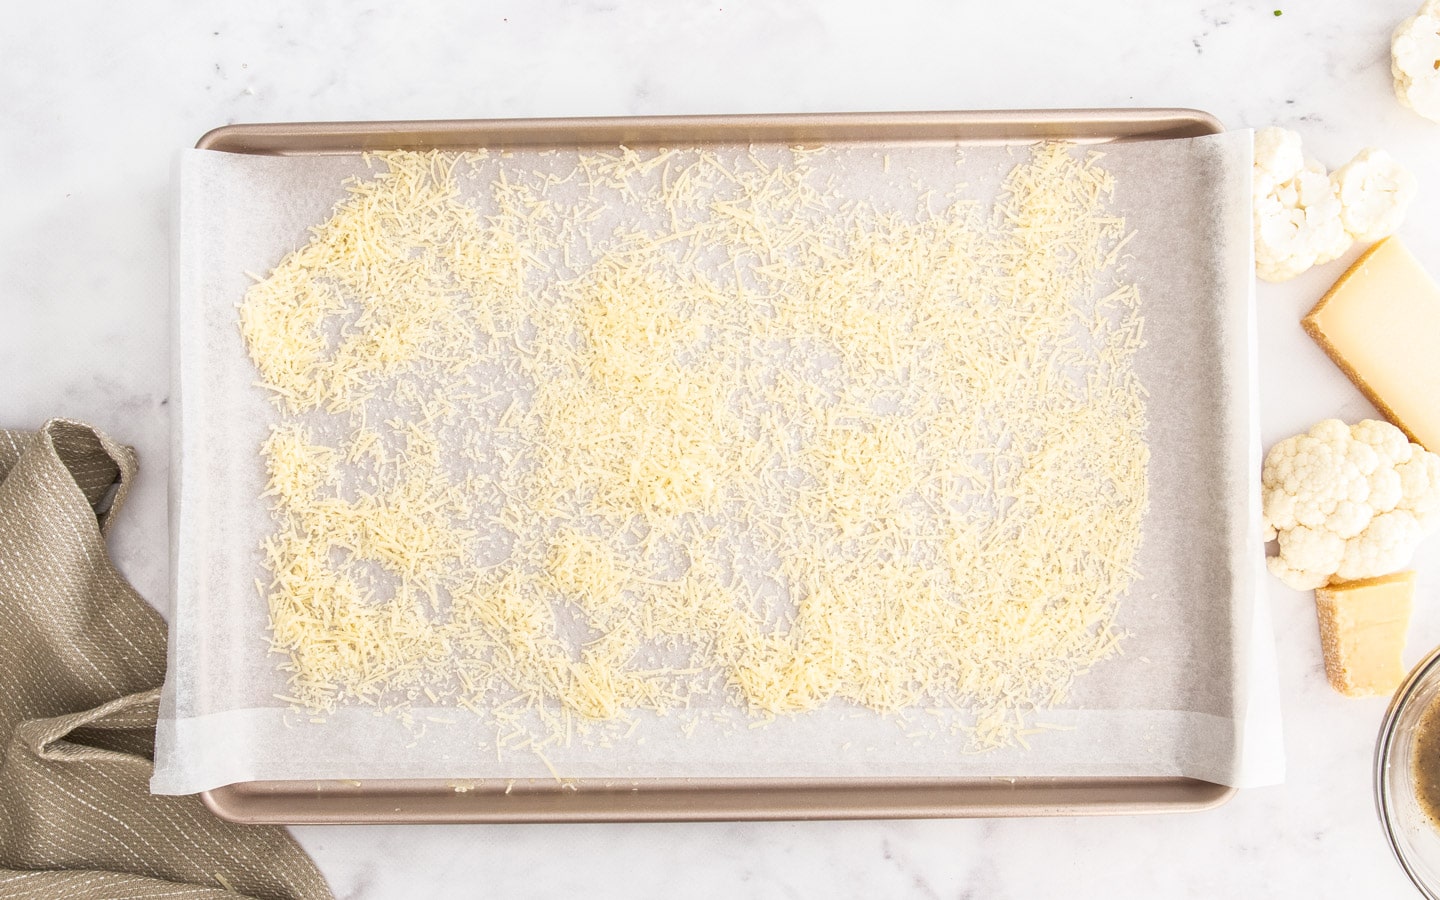 Parmesan cheese scattered over a baking sheet.